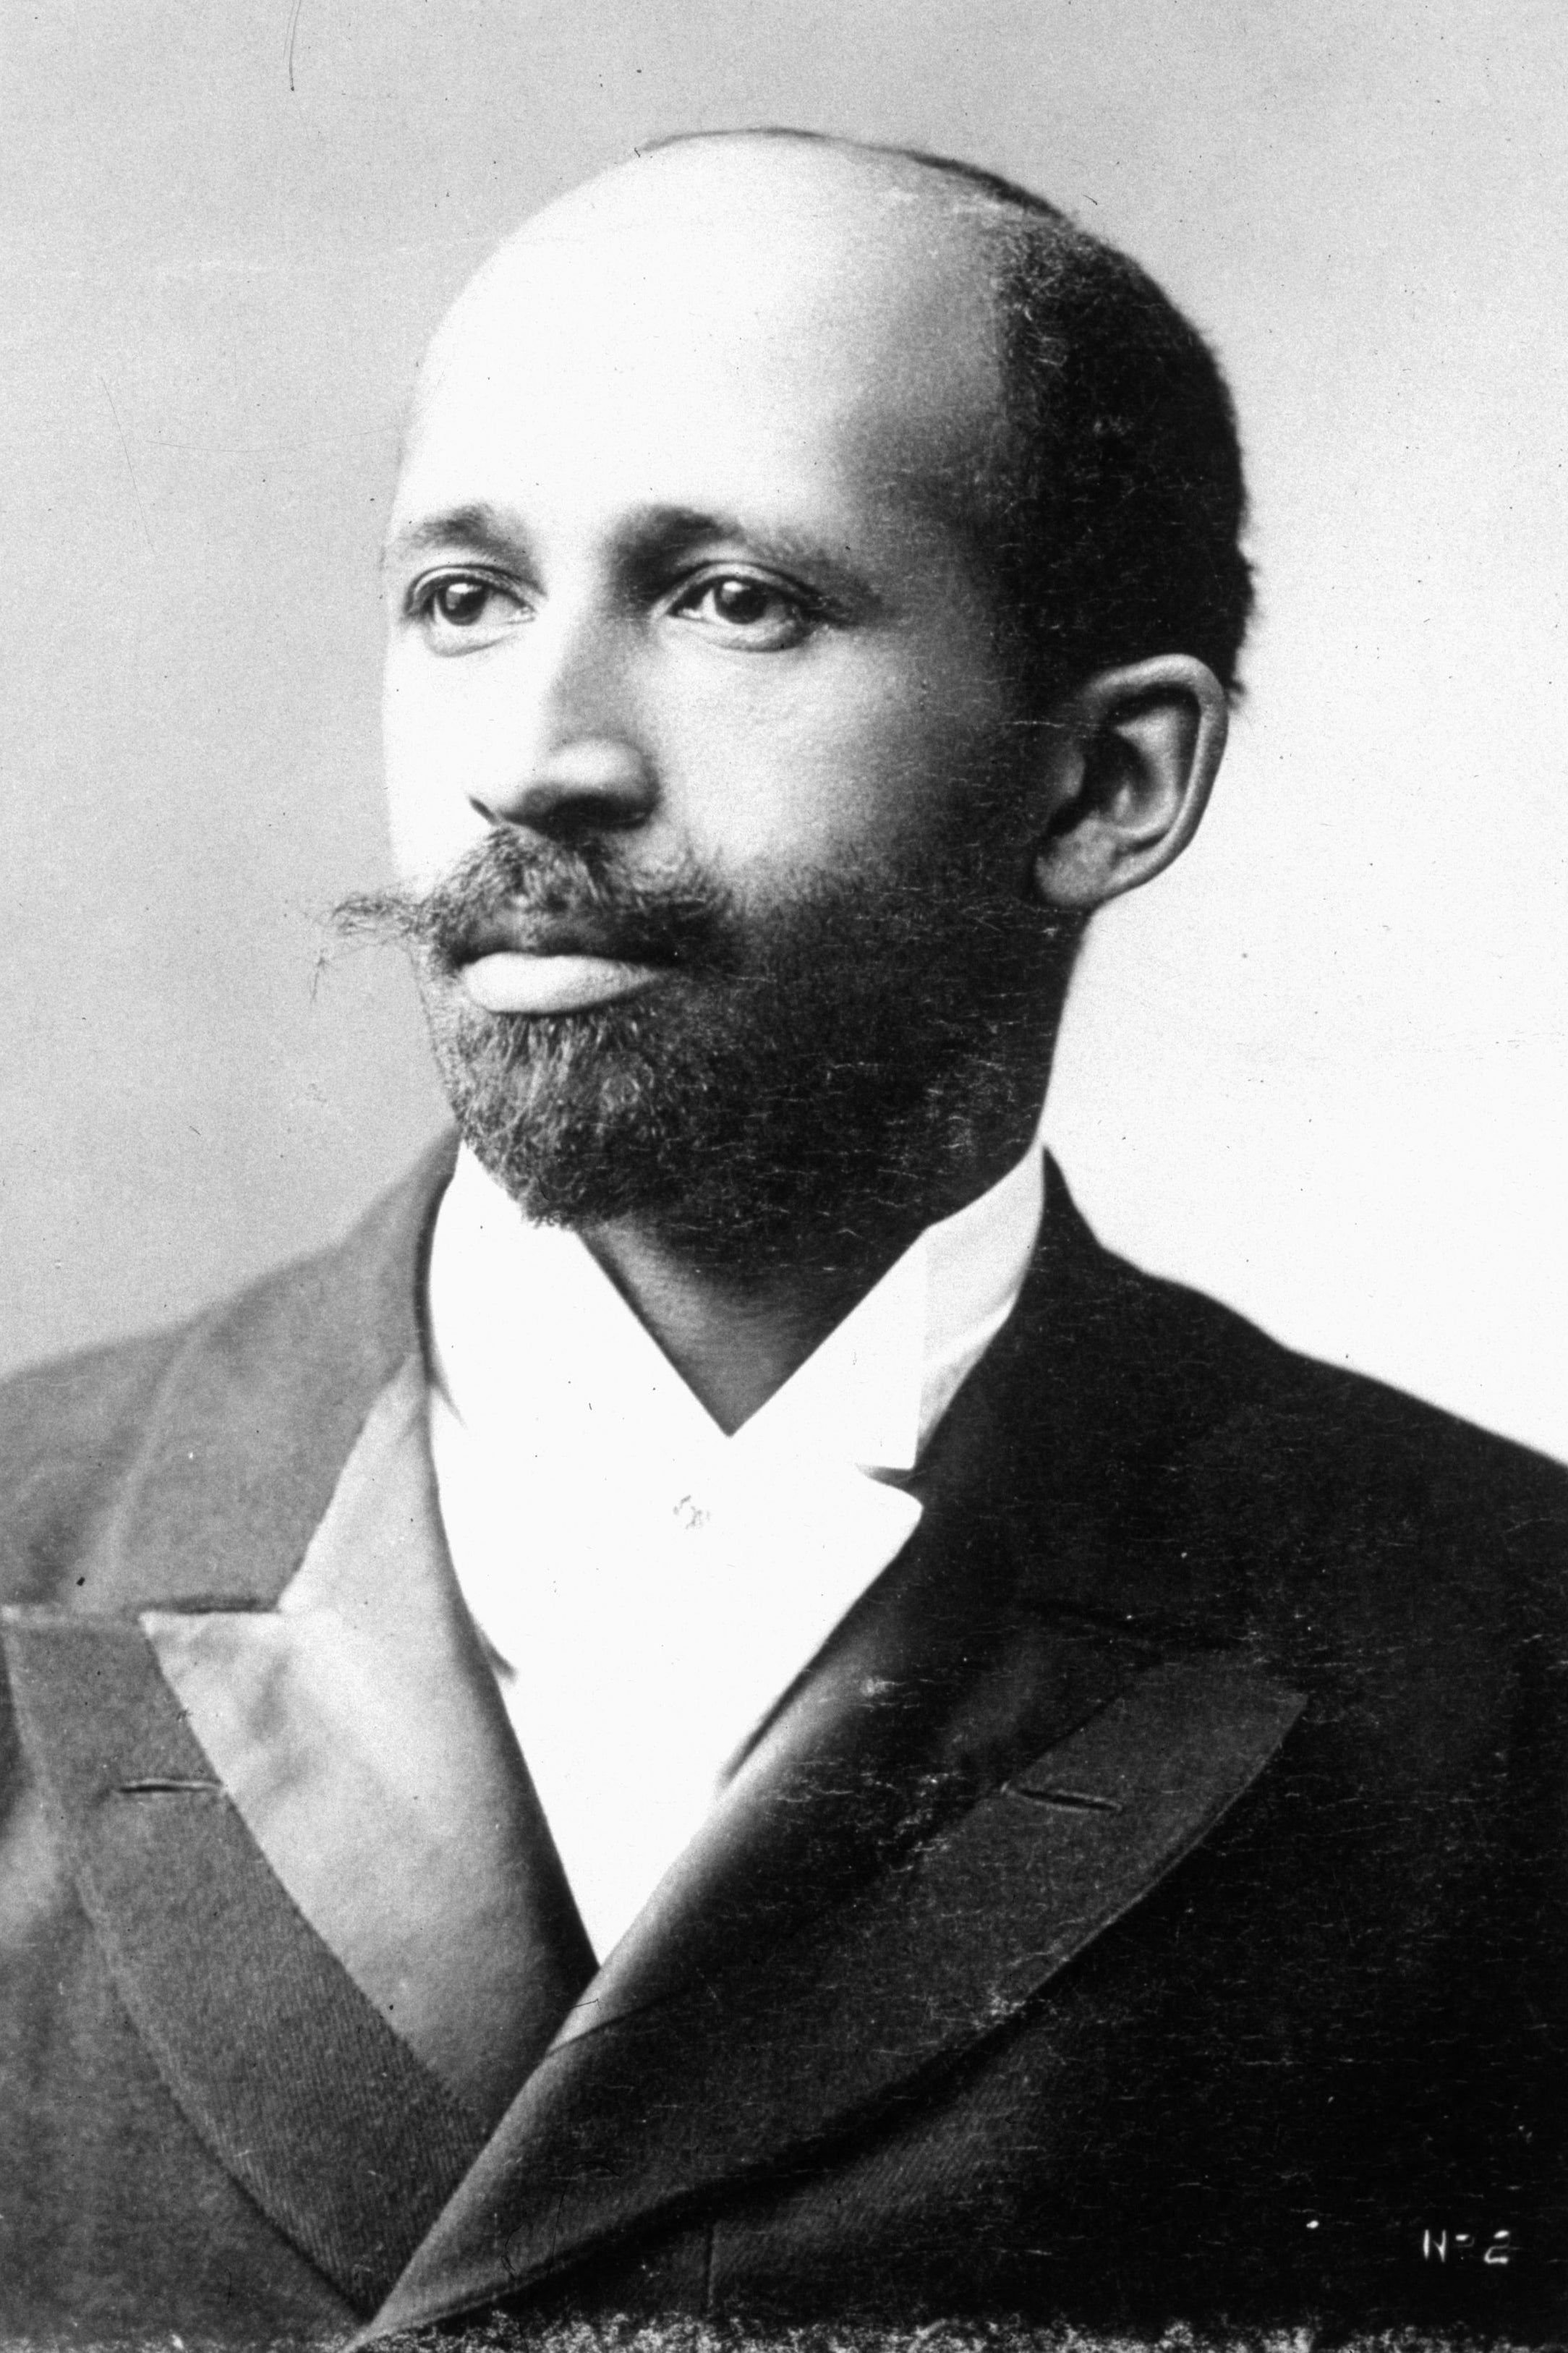 So, About That Time The Department Of Education Couldn't Spell W.E.B. Du Bois
